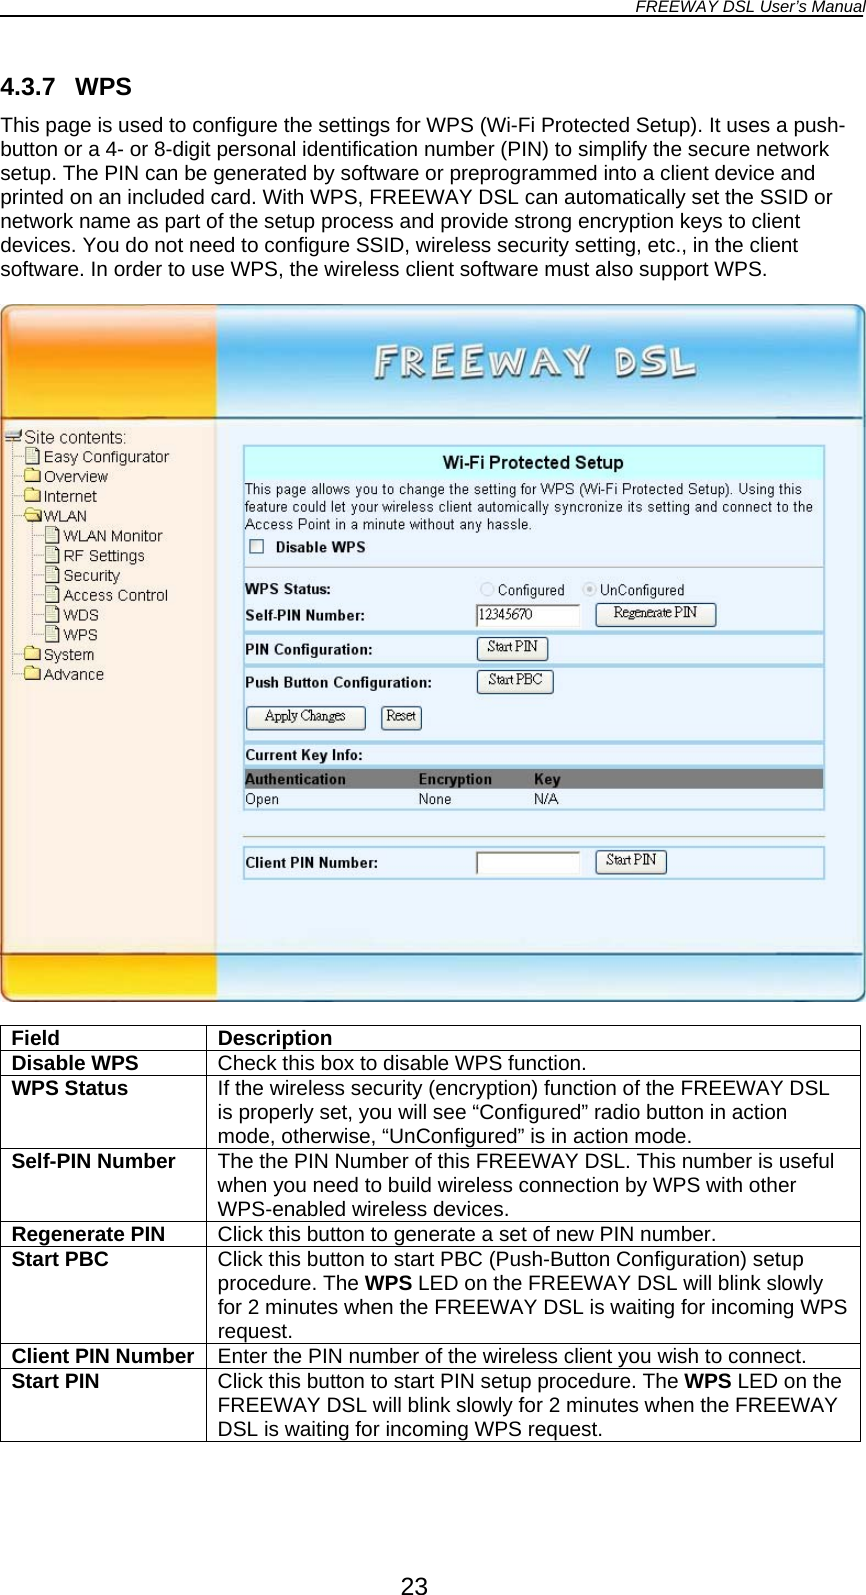 FREEWAY DSL User’s Manual  4.3.7 WPS This page is used to configure the settings for WPS (Wi-Fi Protected Setup). It uses a push-button or a 4- or 8-digit personal identification number (PIN) to simplify the secure network setup. The PIN can be generated by software or preprogrammed into a client device and printed on an included card. With WPS, FREEWAY DSL can automatically set the SSID or network name as part of the setup process and provide strong encryption keys to client devices. You do not need to configure SSID, wireless security setting, etc., in the client software. In order to use WPS, the wireless client software must also support WPS.    Field Description Disable WPS  Check this box to disable WPS function. WPS Status  If the wireless security (encryption) function of the FREEWAY DSL is properly set, you will see “Configured” radio button in action mode, otherwise, “UnConfigured” is in action mode. Self-PIN Number  The the PIN Number of this FREEWAY DSL. This number is useful when you need to build wireless connection by WPS with other WPS-enabled wireless devices. Regenerate PIN  Click this button to generate a set of new PIN number. Start PBC  Click this button to start PBC (Push-Button Configuration) setup procedure. The WPS LED on the FREEWAY DSL will blink slowly for 2 minutes when the FREEWAY DSL is waiting for incoming WPS request. Client PIN Number Enter the PIN number of the wireless client you wish to connect. Start PIN  Click this button to start PIN setup procedure. The WPS LED on the FREEWAY DSL will blink slowly for 2 minutes when the FREEWAY DSL is waiting for incoming WPS request.  23 